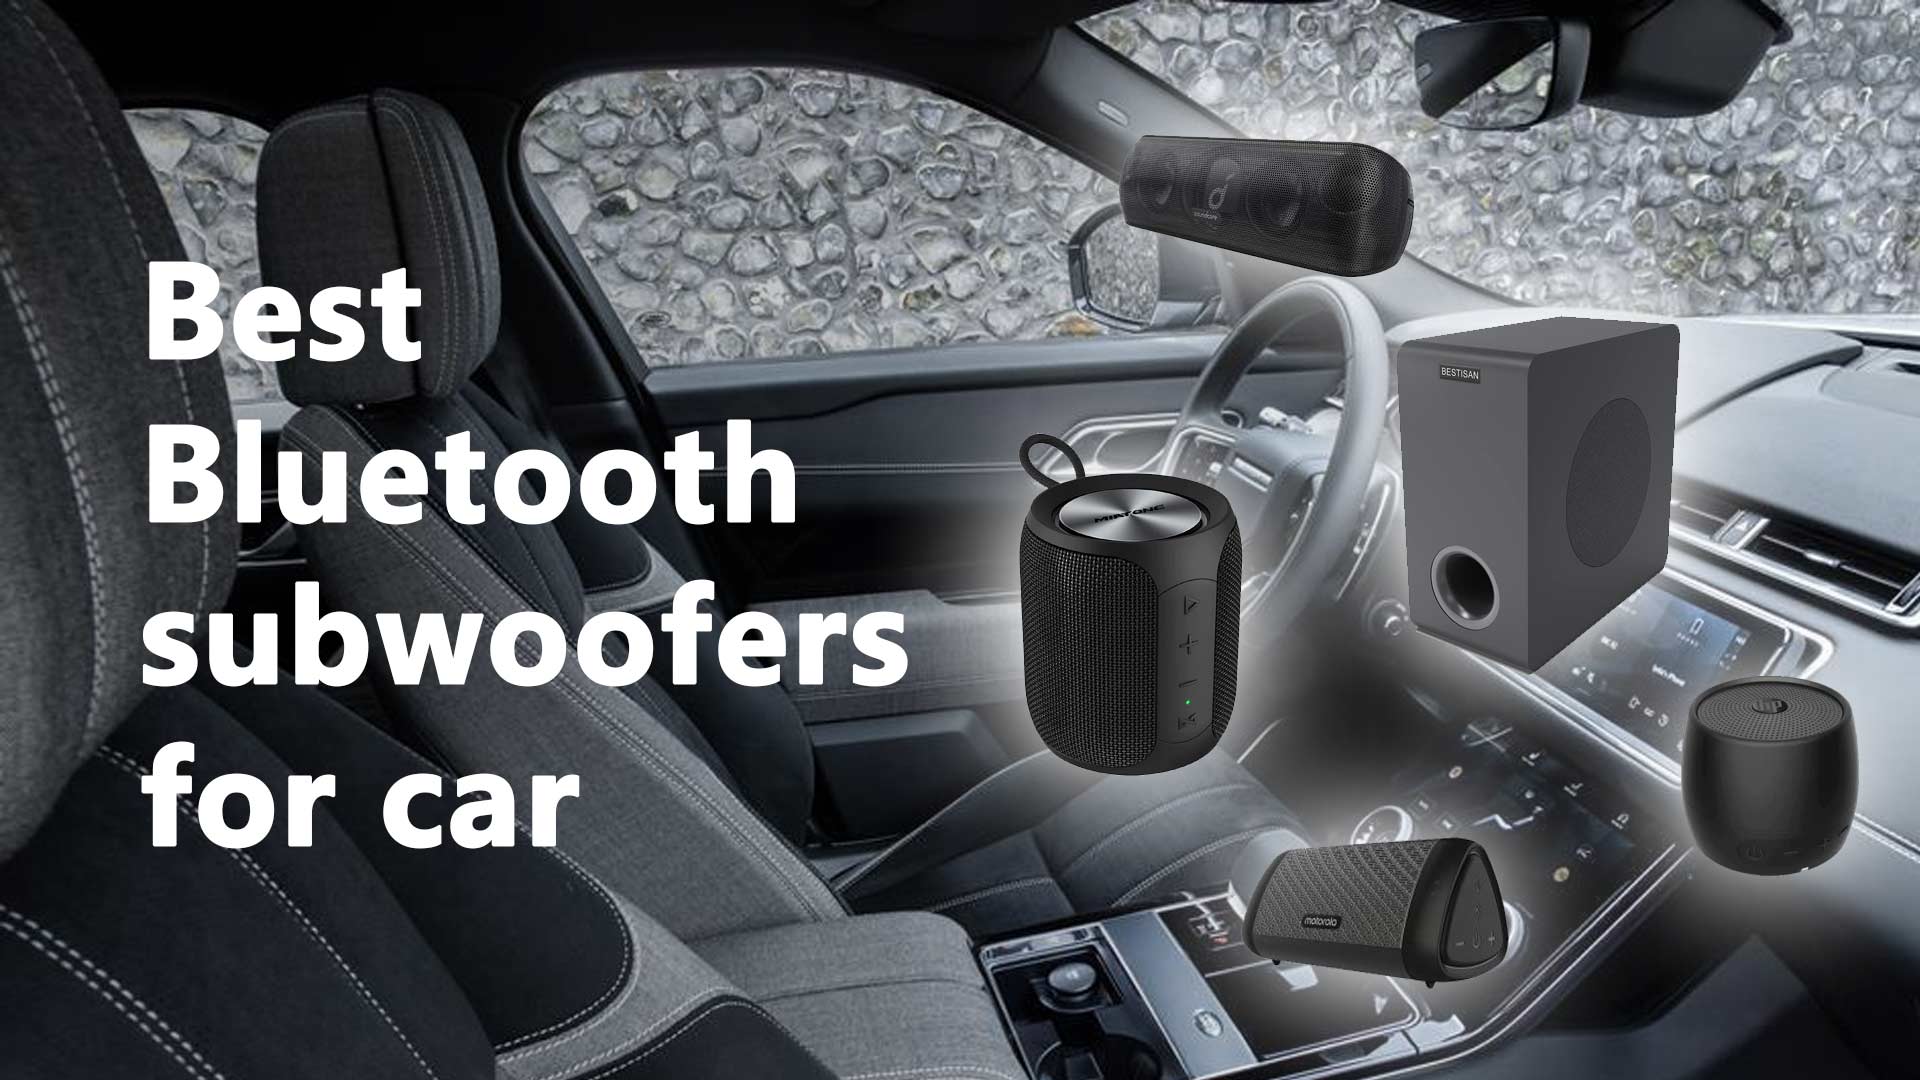 Best Bluetooth subwoofers for car